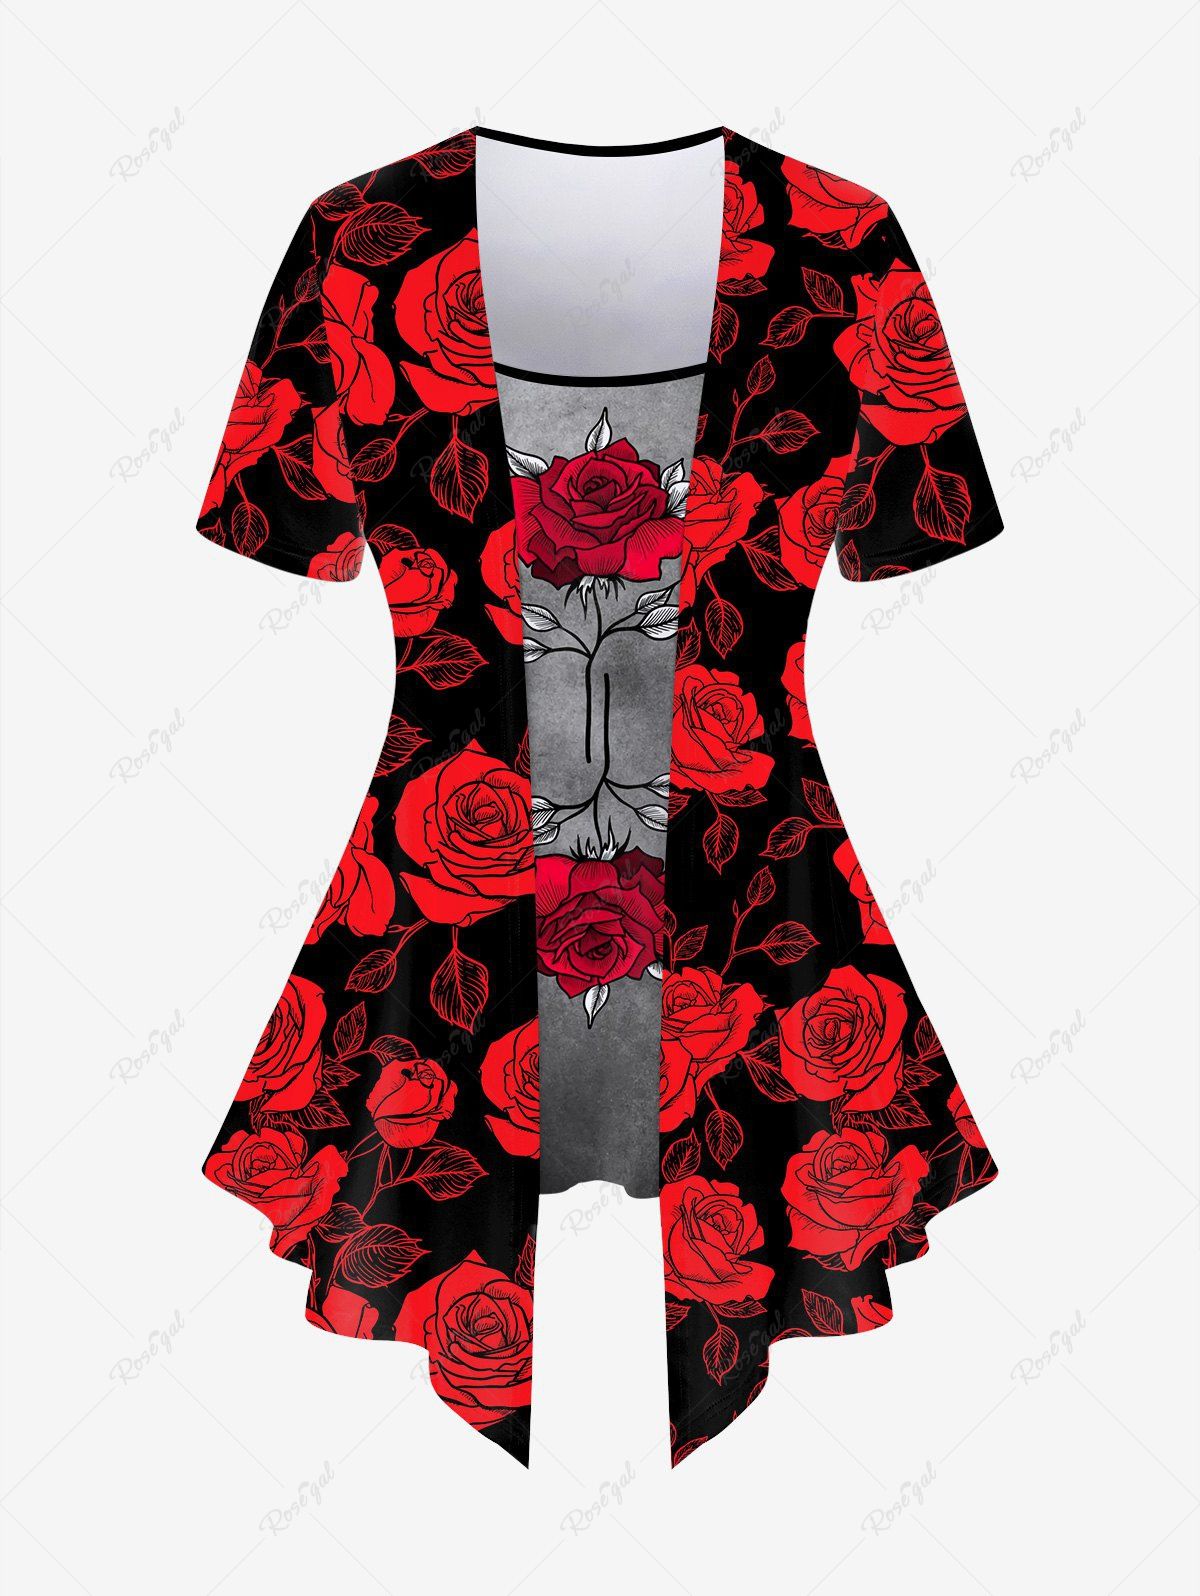 Hot Plus Size Flower Print 2 In 1 T-shirt  